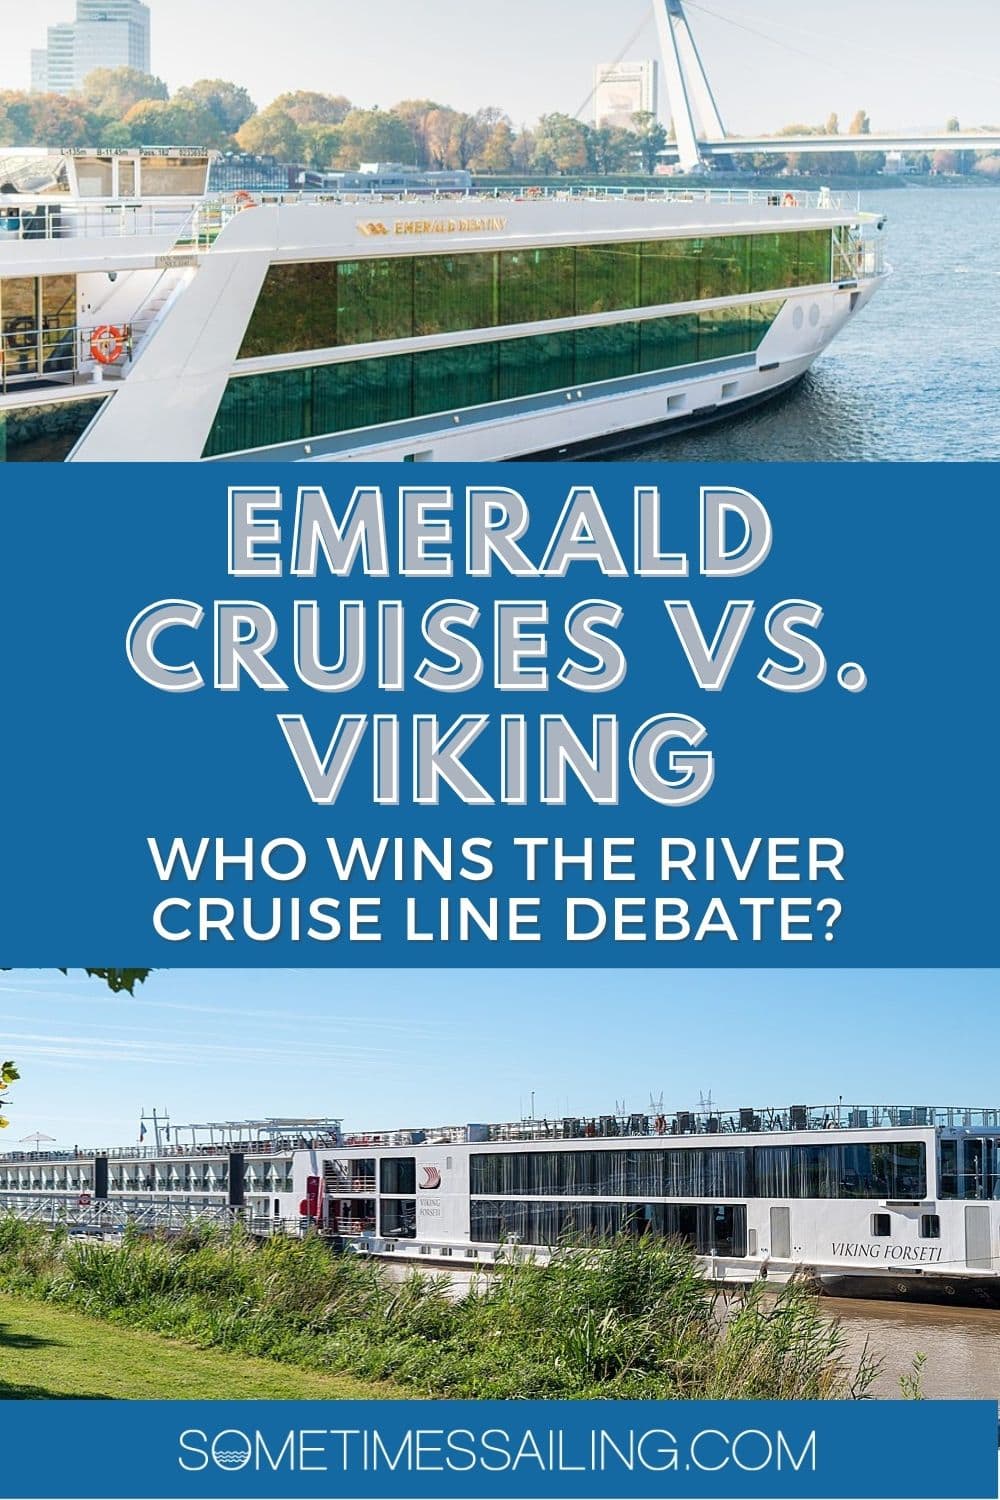 Emerald Cruises vs. Viking: who wins the river cruise line debate? With photos of each river cruise ship above and beneath the title.